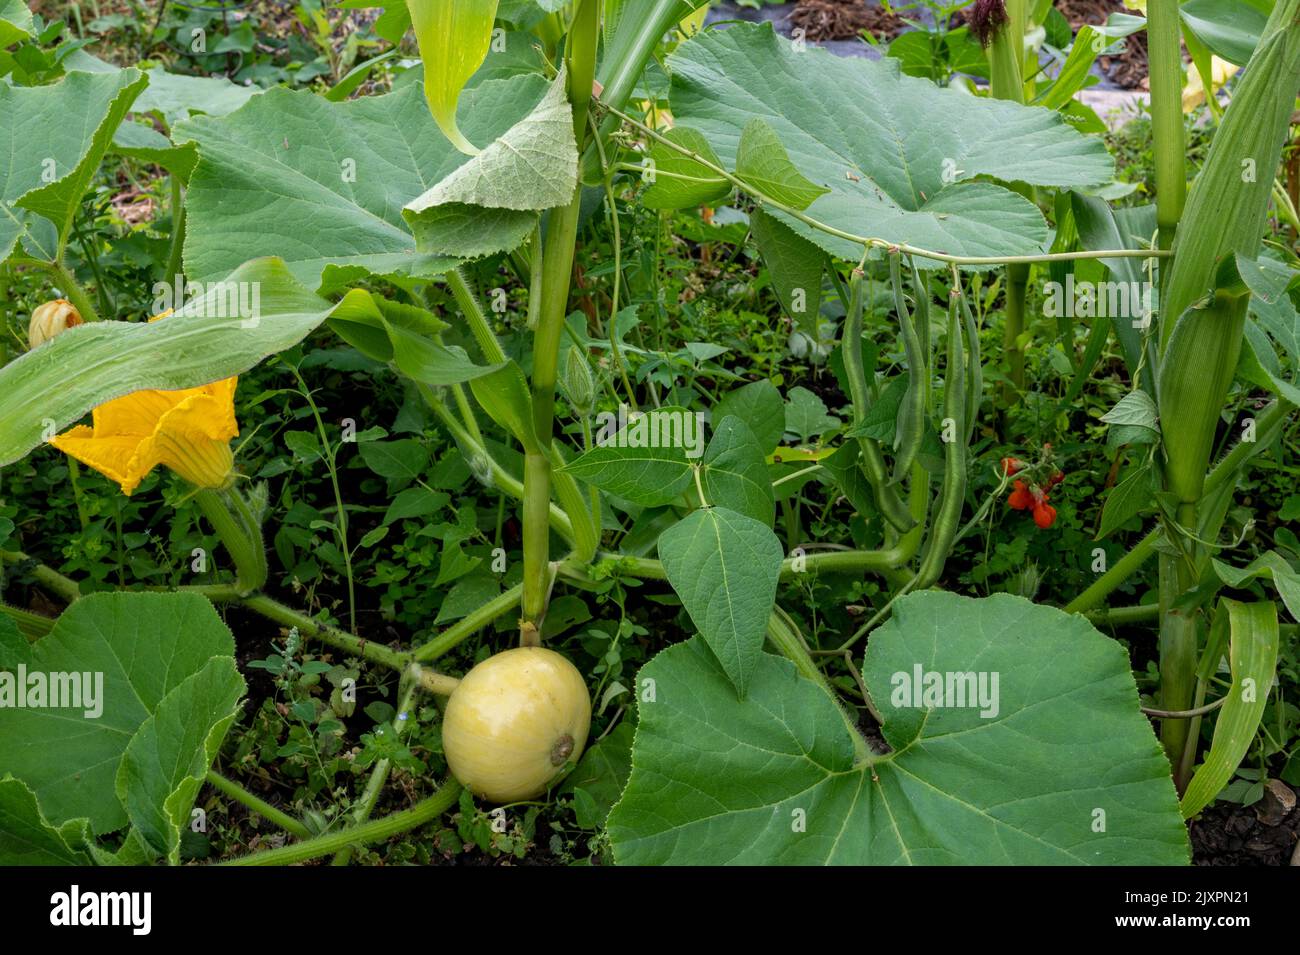 Three sisters method of growing corn (maize), beans and squash/ pumpkins together as complimentary crops. Stock Photo